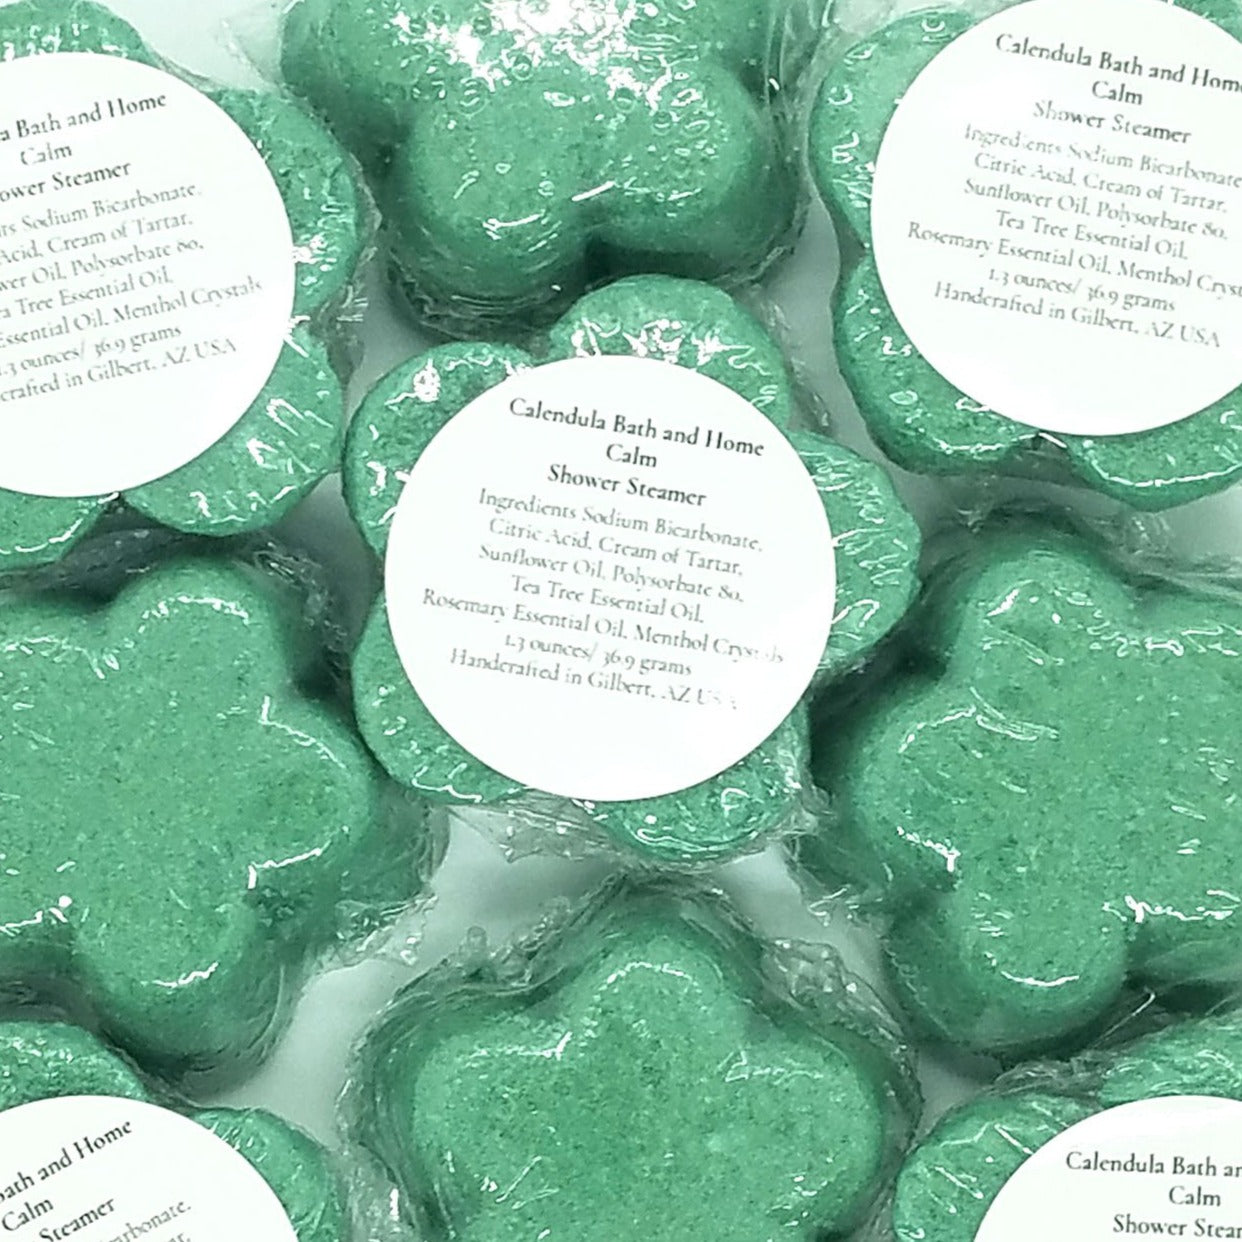 Calm - Tea Tree & Rosemary Shower Steamer with Menthol Crystals - Calendula Bath and Home